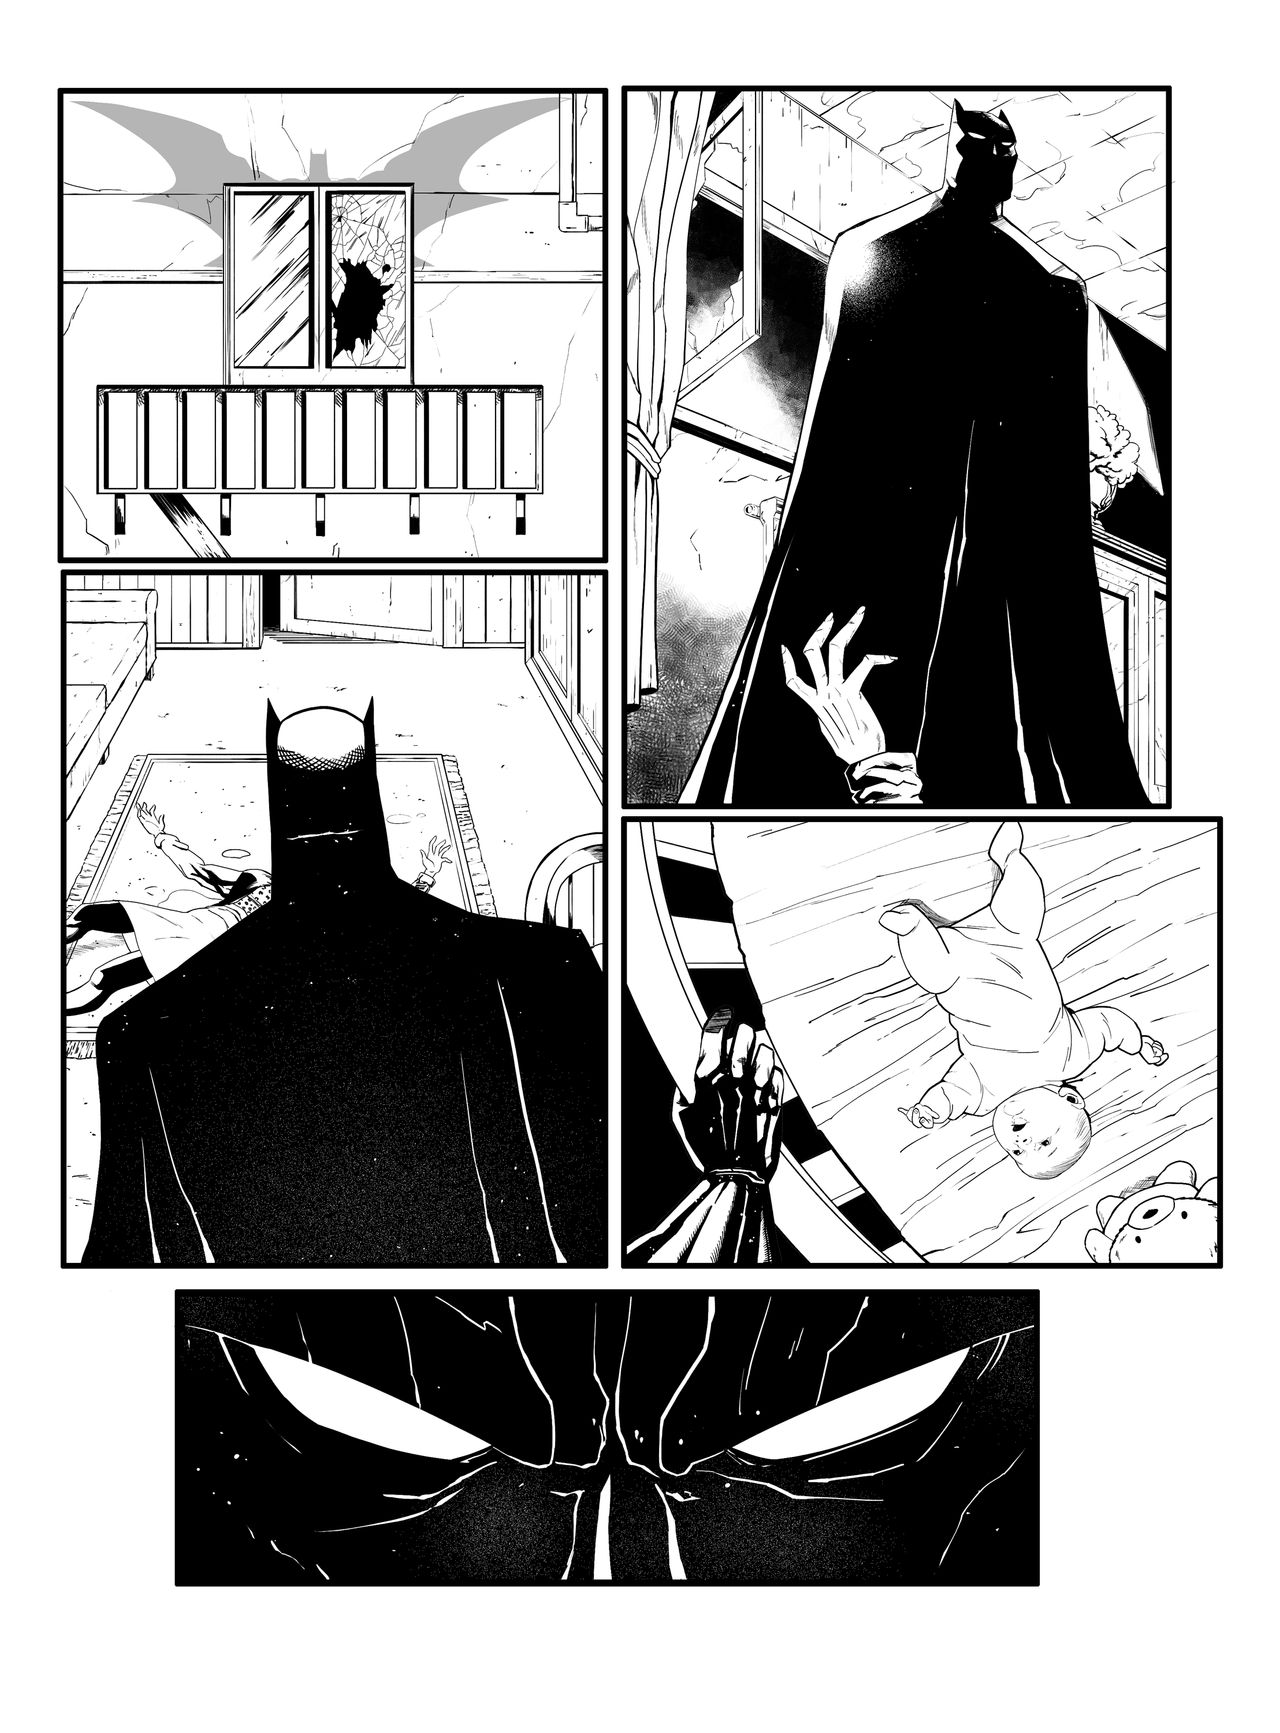 Batman-Rules-of-engagement-#3 by akemdraw on DeviantArt